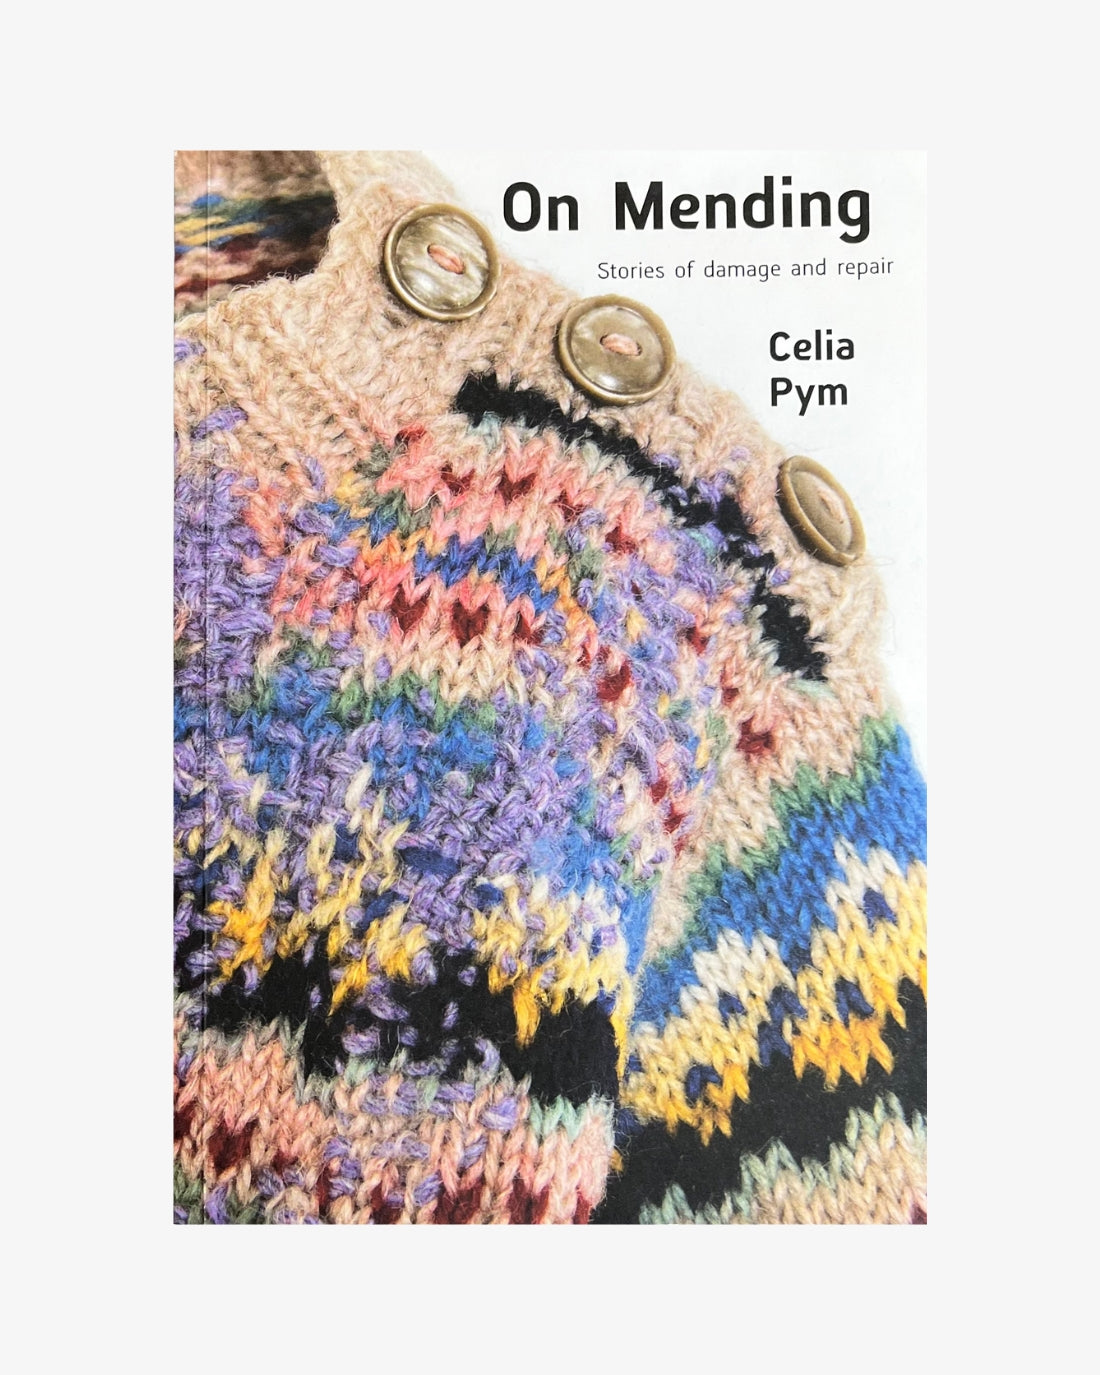 On Mending: Stories of damage and repair by Celia Pym